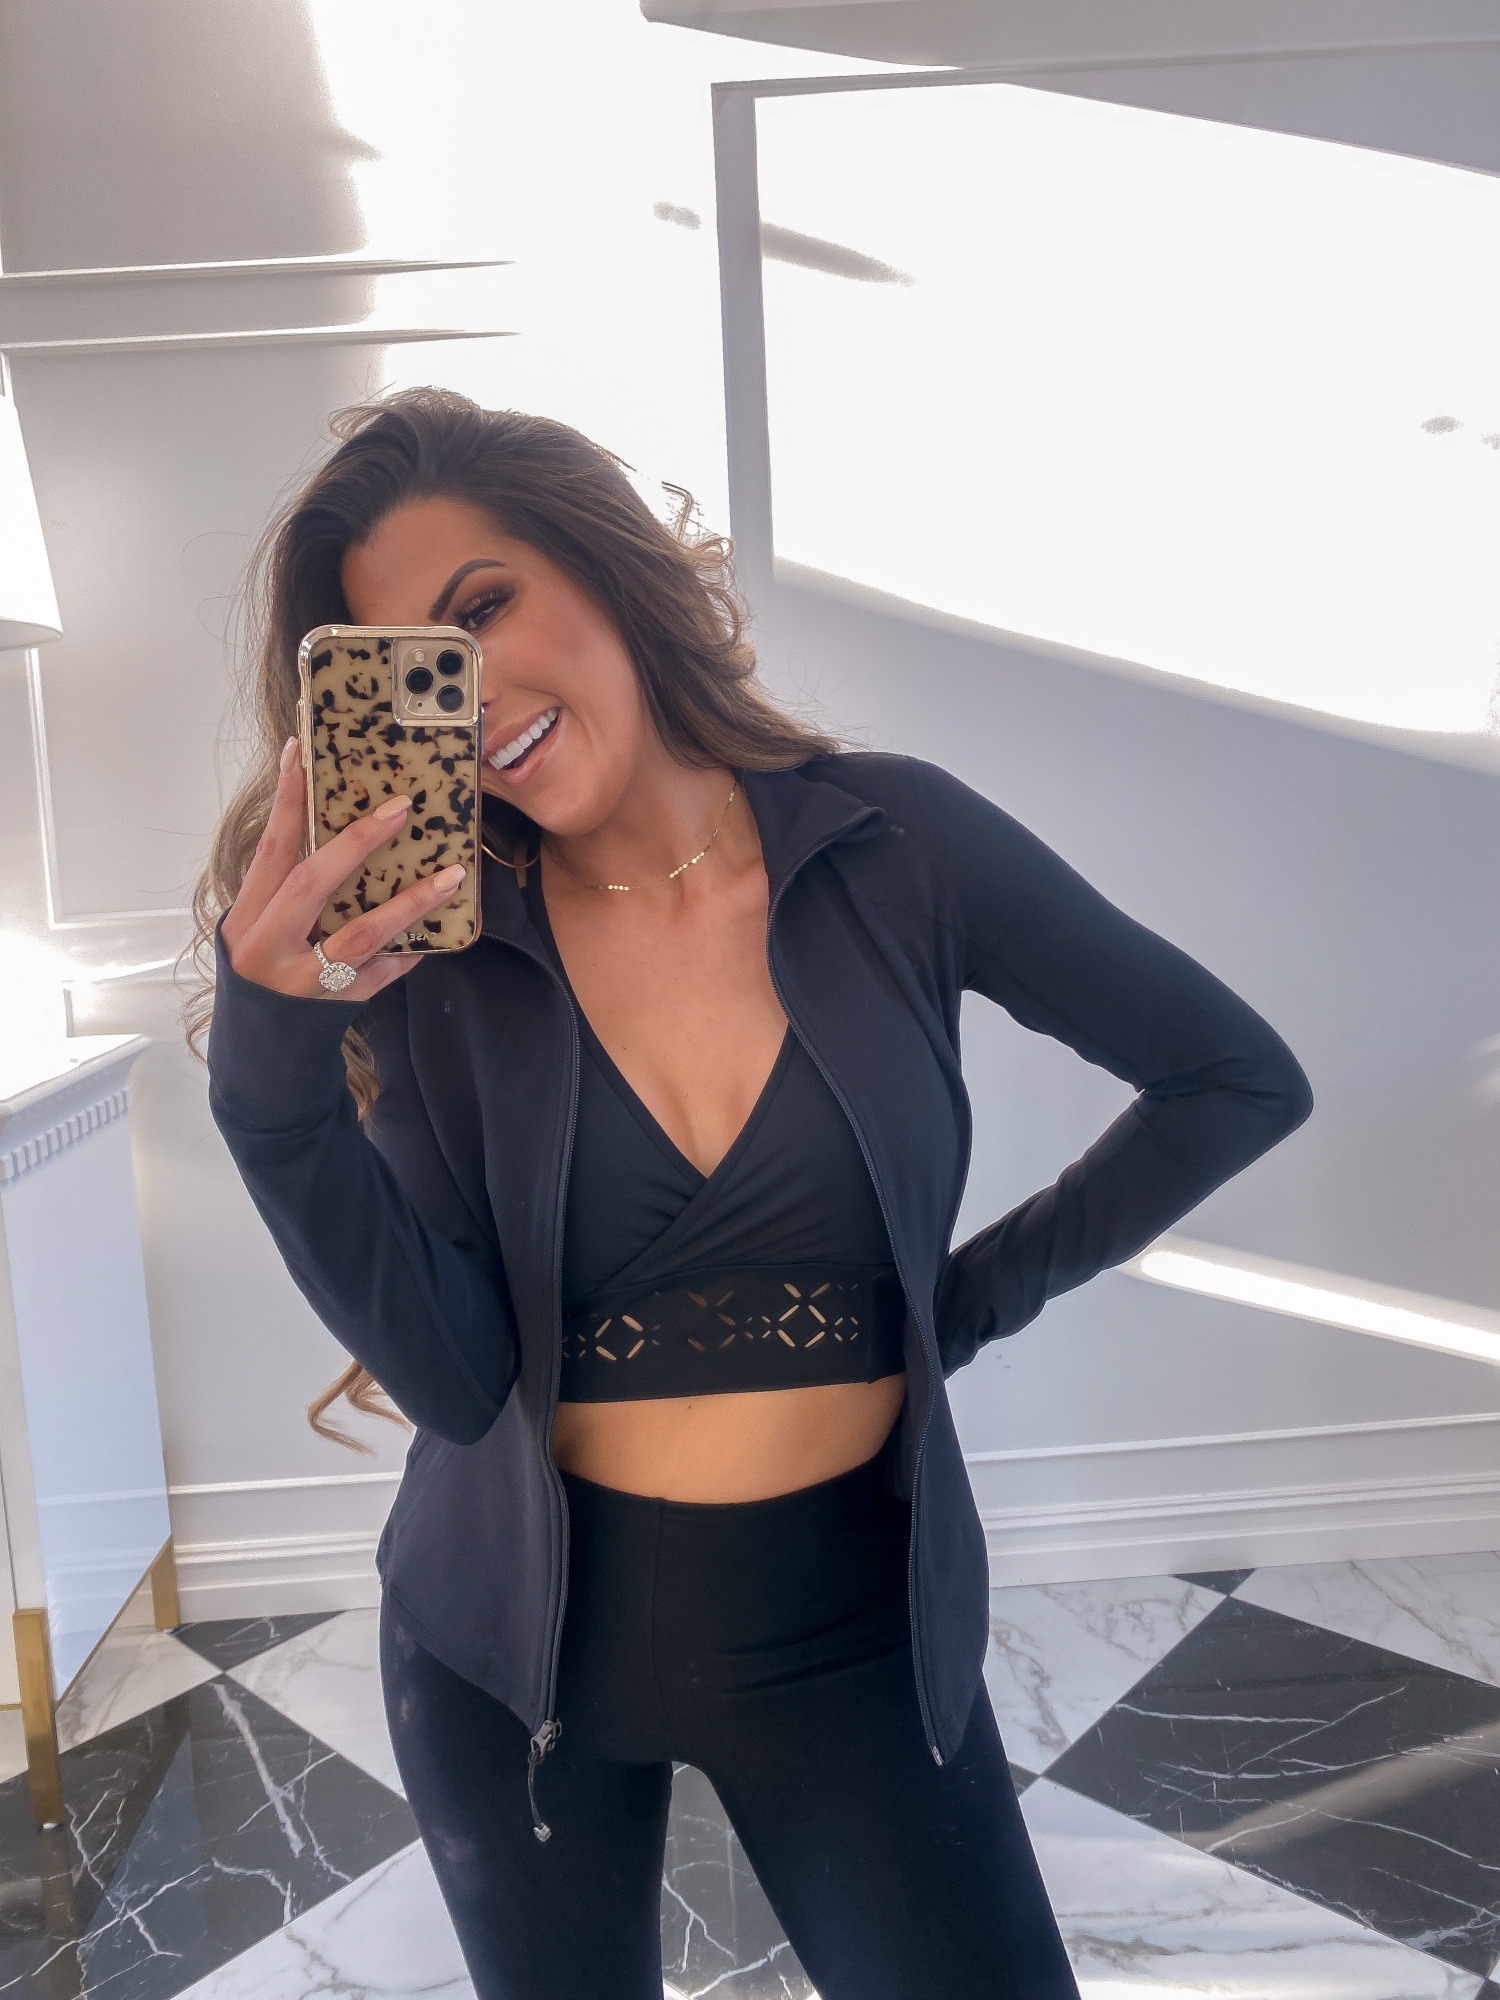 Nordstrom Anniversary Sale by popular US fashion blog, The Sweetest Thing: collage image of Emily Gemma wearing a Nordstrom ZELLA Hooded Jacket, ZELLA Nova Perforated Racerback Bra, and COMMANDO Supplex Angle Leggings.